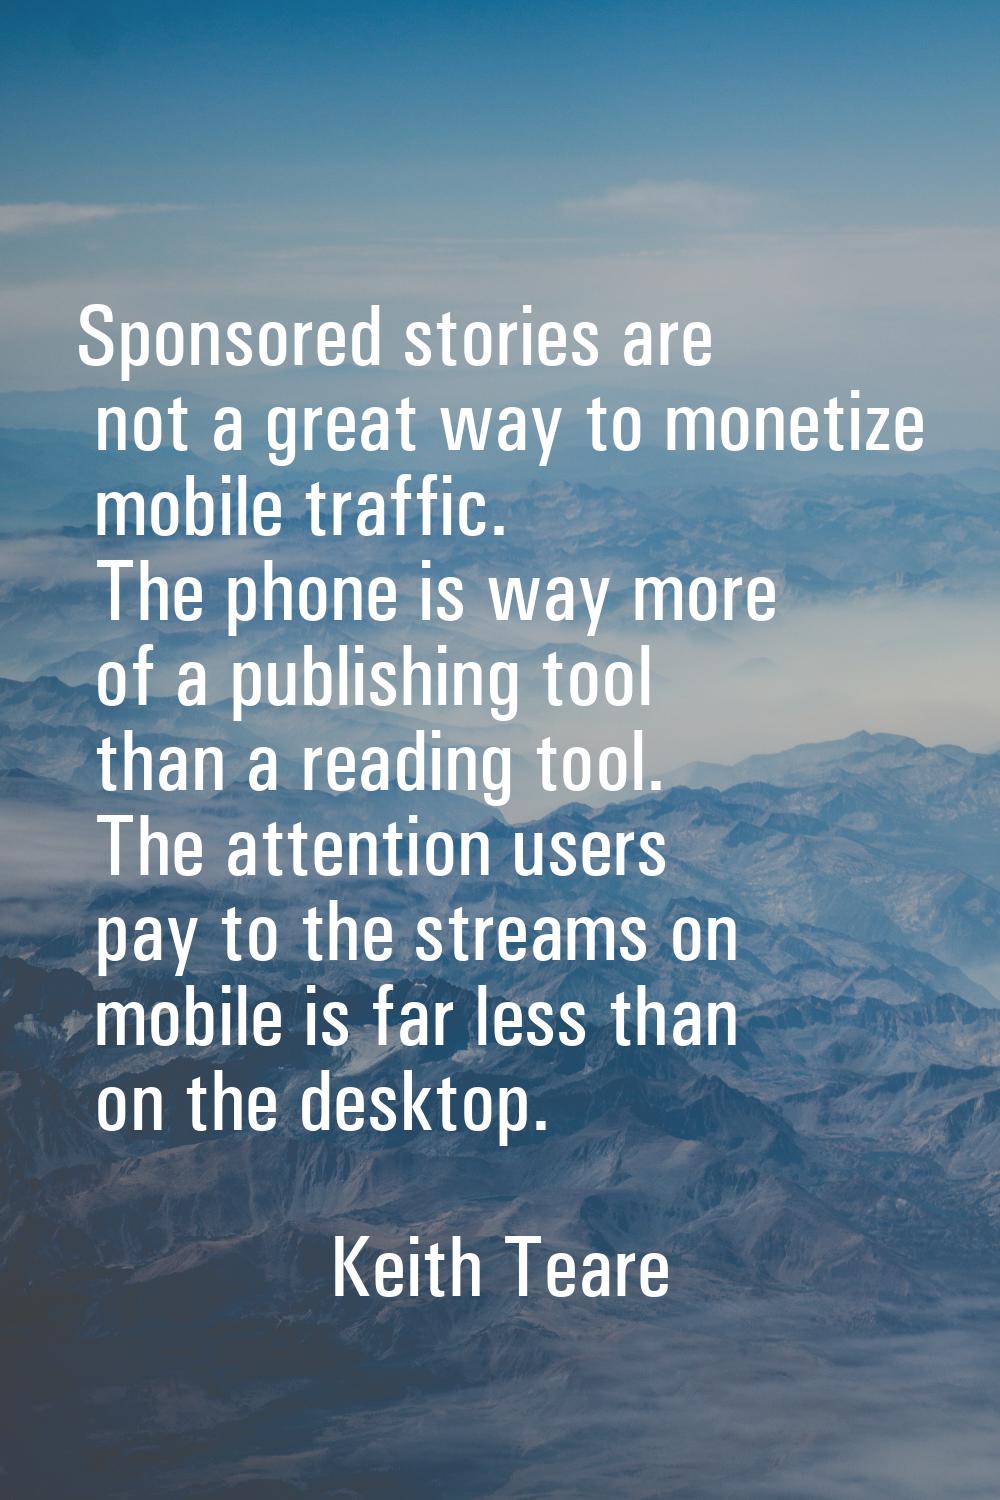 Sponsored stories are not a great way to monetize mobile traffic. The phone is way more of a publis